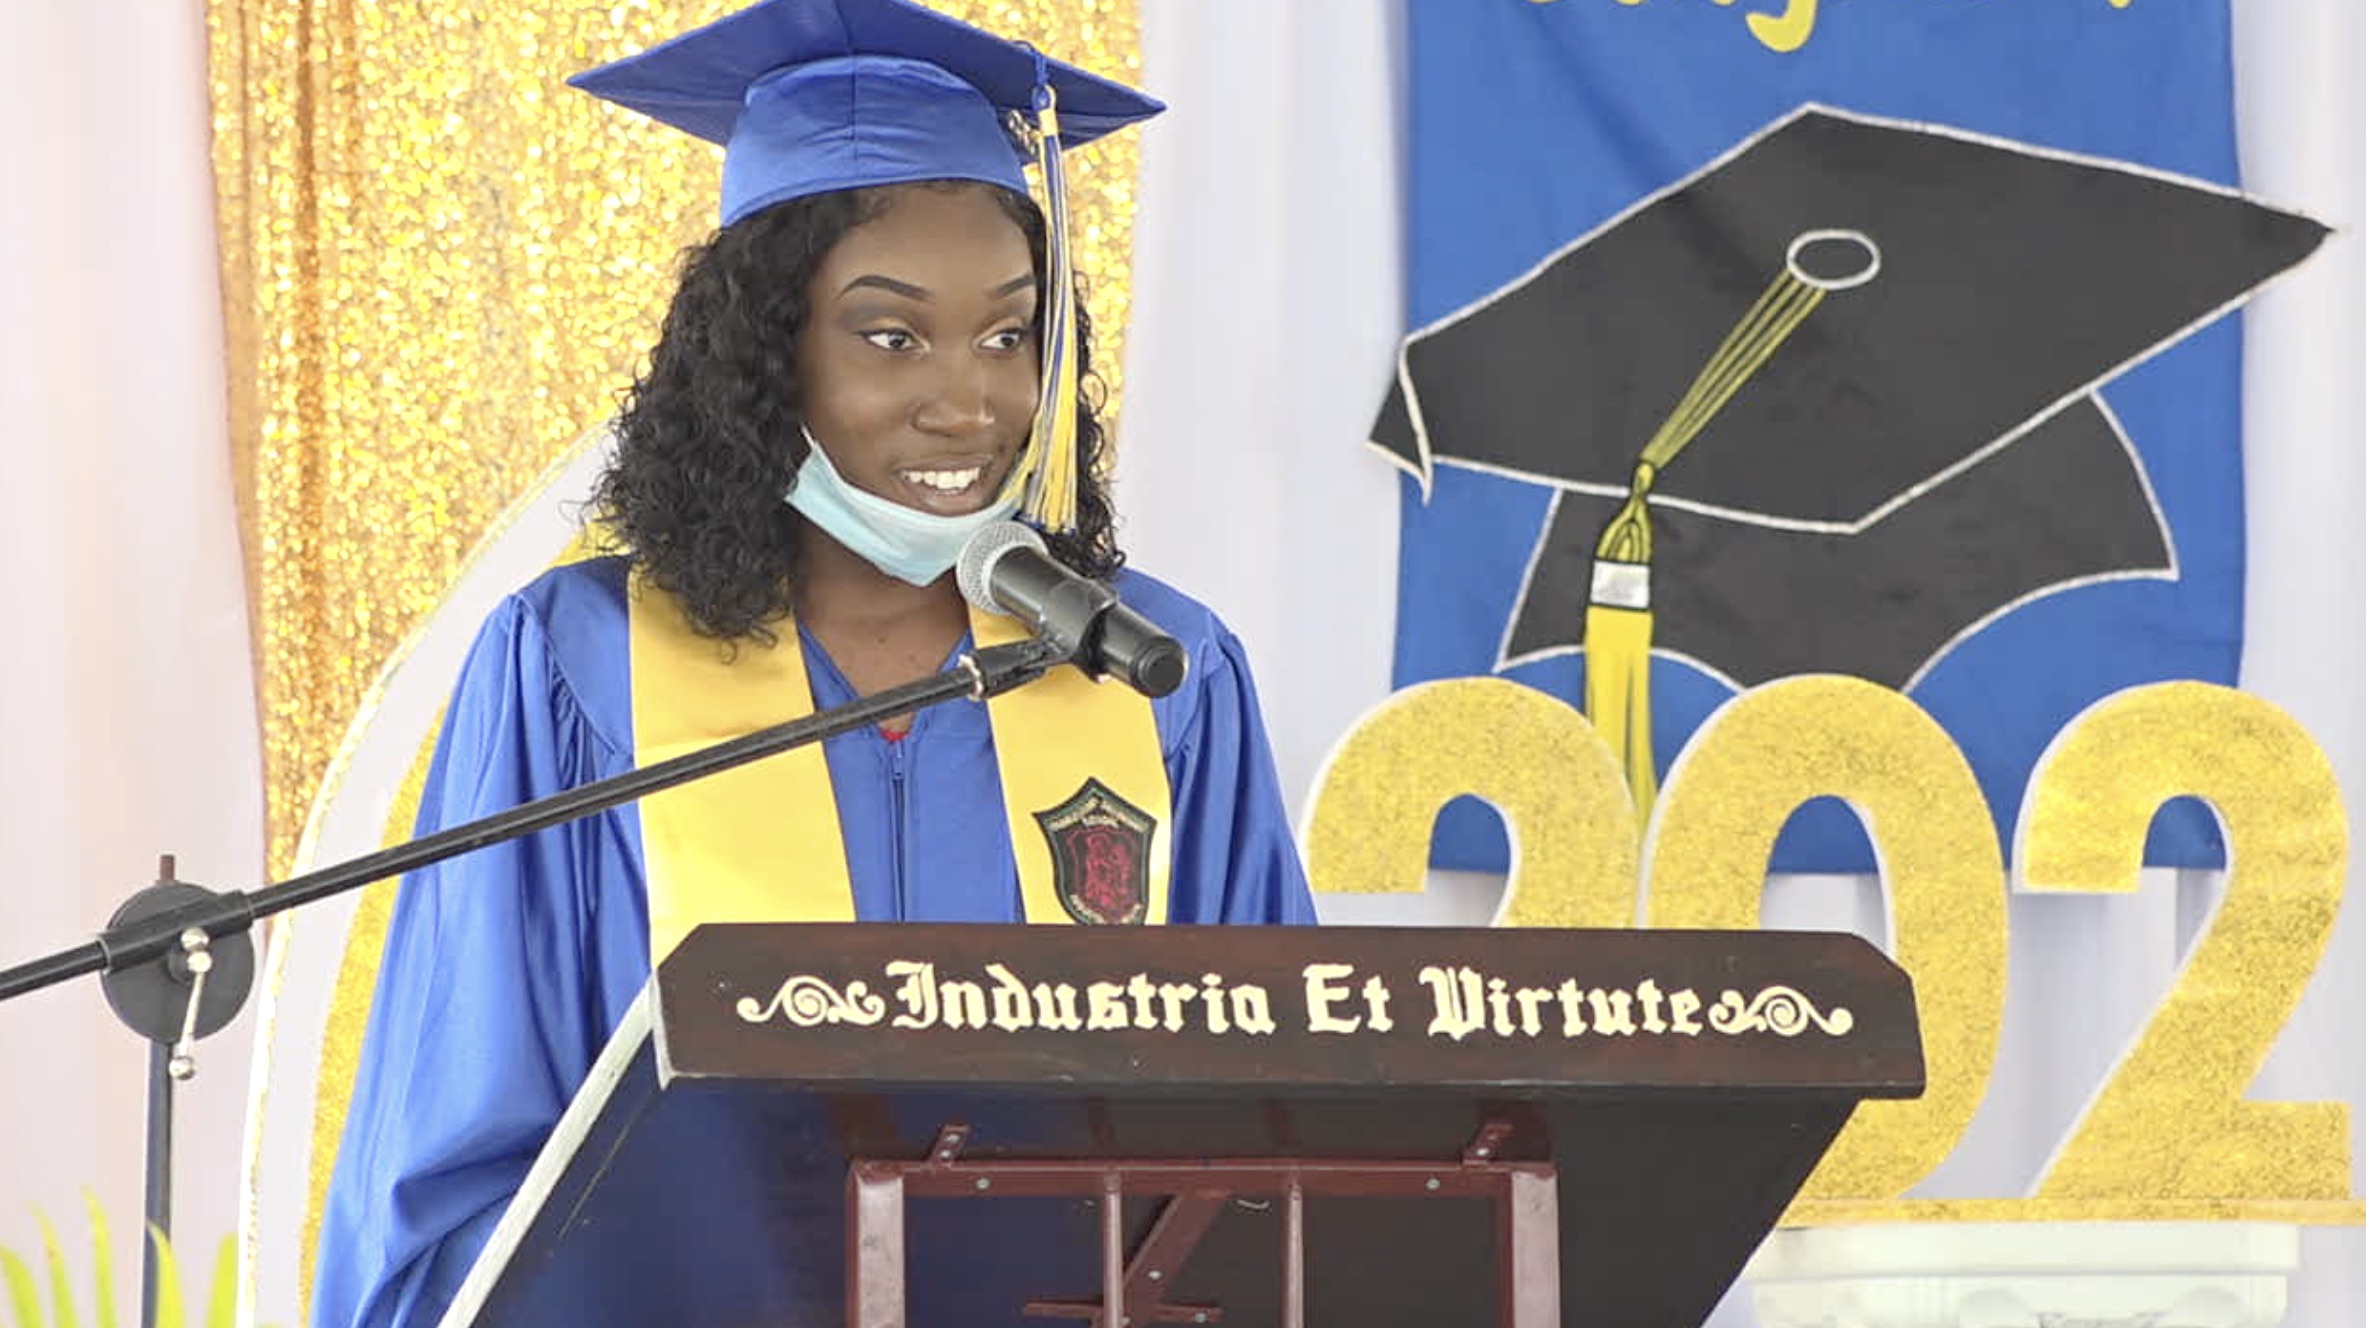 Ms. Donella Thompson, valedictorian of the Charlestown Secondary School’s Graduating Class of 2020 delivering her valedictory address at the school’s 2020 graduation ceremony at the Nevis Cultural Village on December 08, 2020